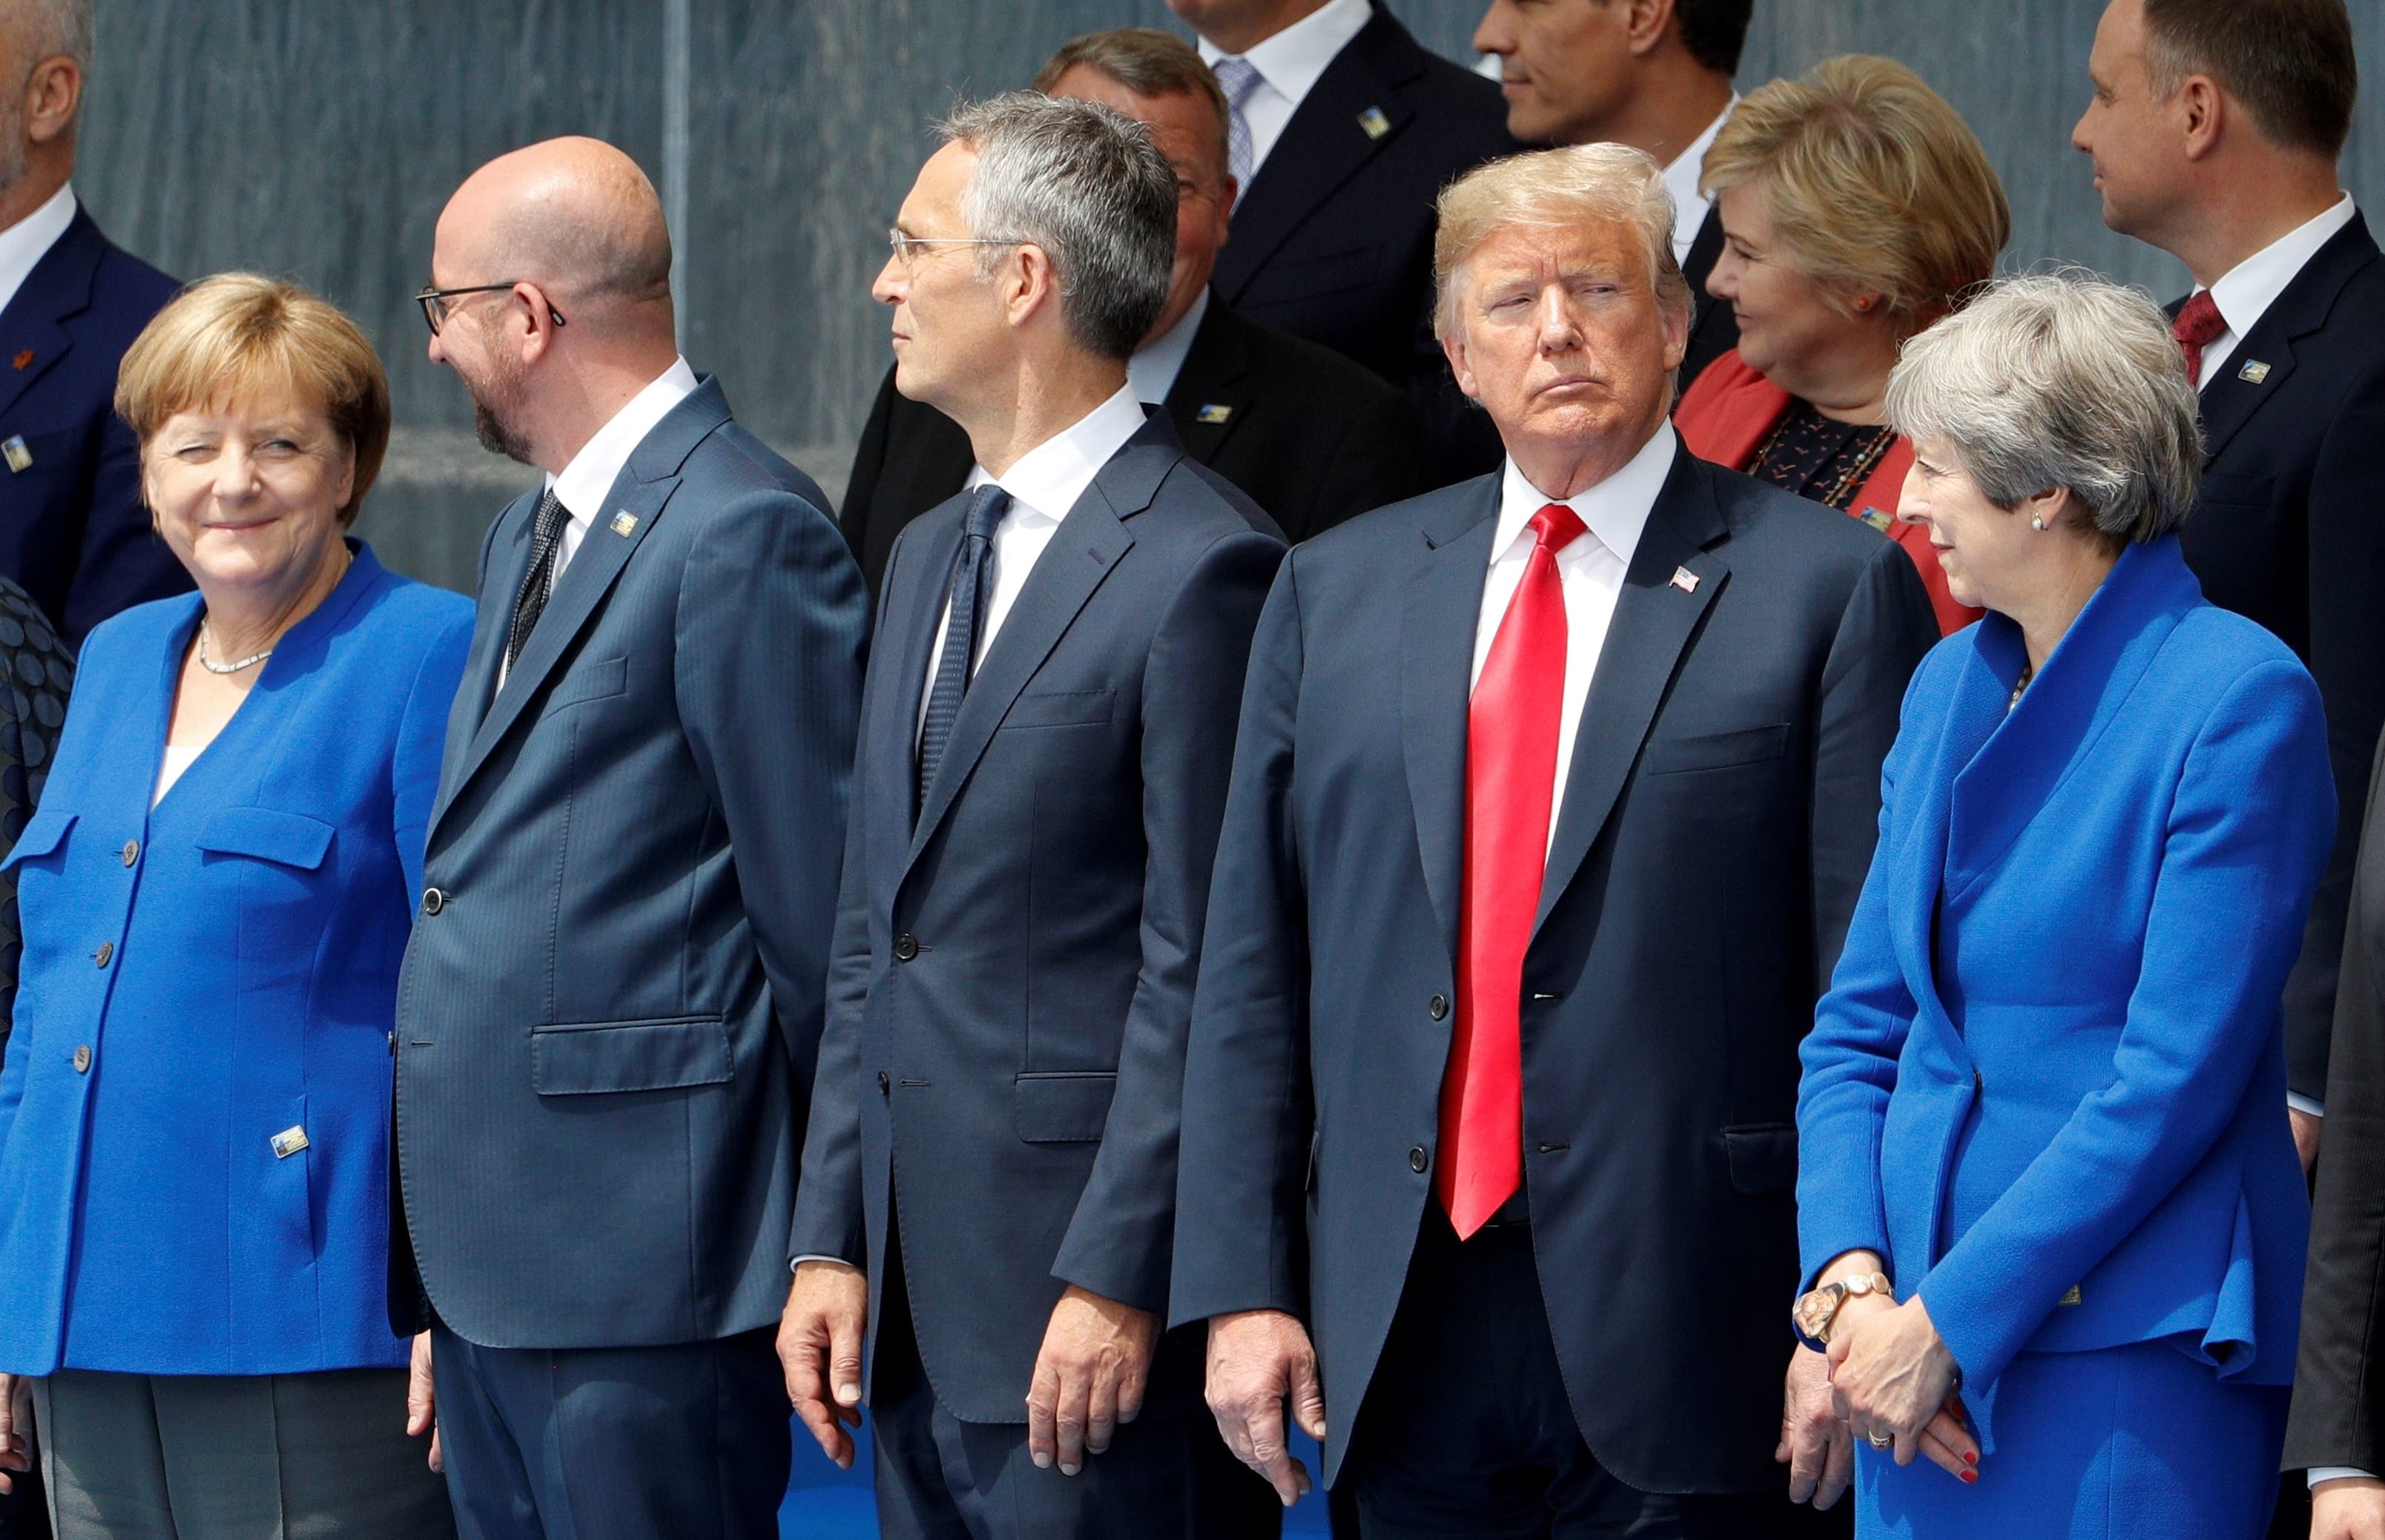 From left, German Chancellor Angela Merkel, Belgium's Prime Minister Charles Michel, NATO Secretary General Jens Stoltenberg, US President Donald Trump and Britain's Prime Minister Theresa May attend the opening ceremony of the Nato summit in Brussels.